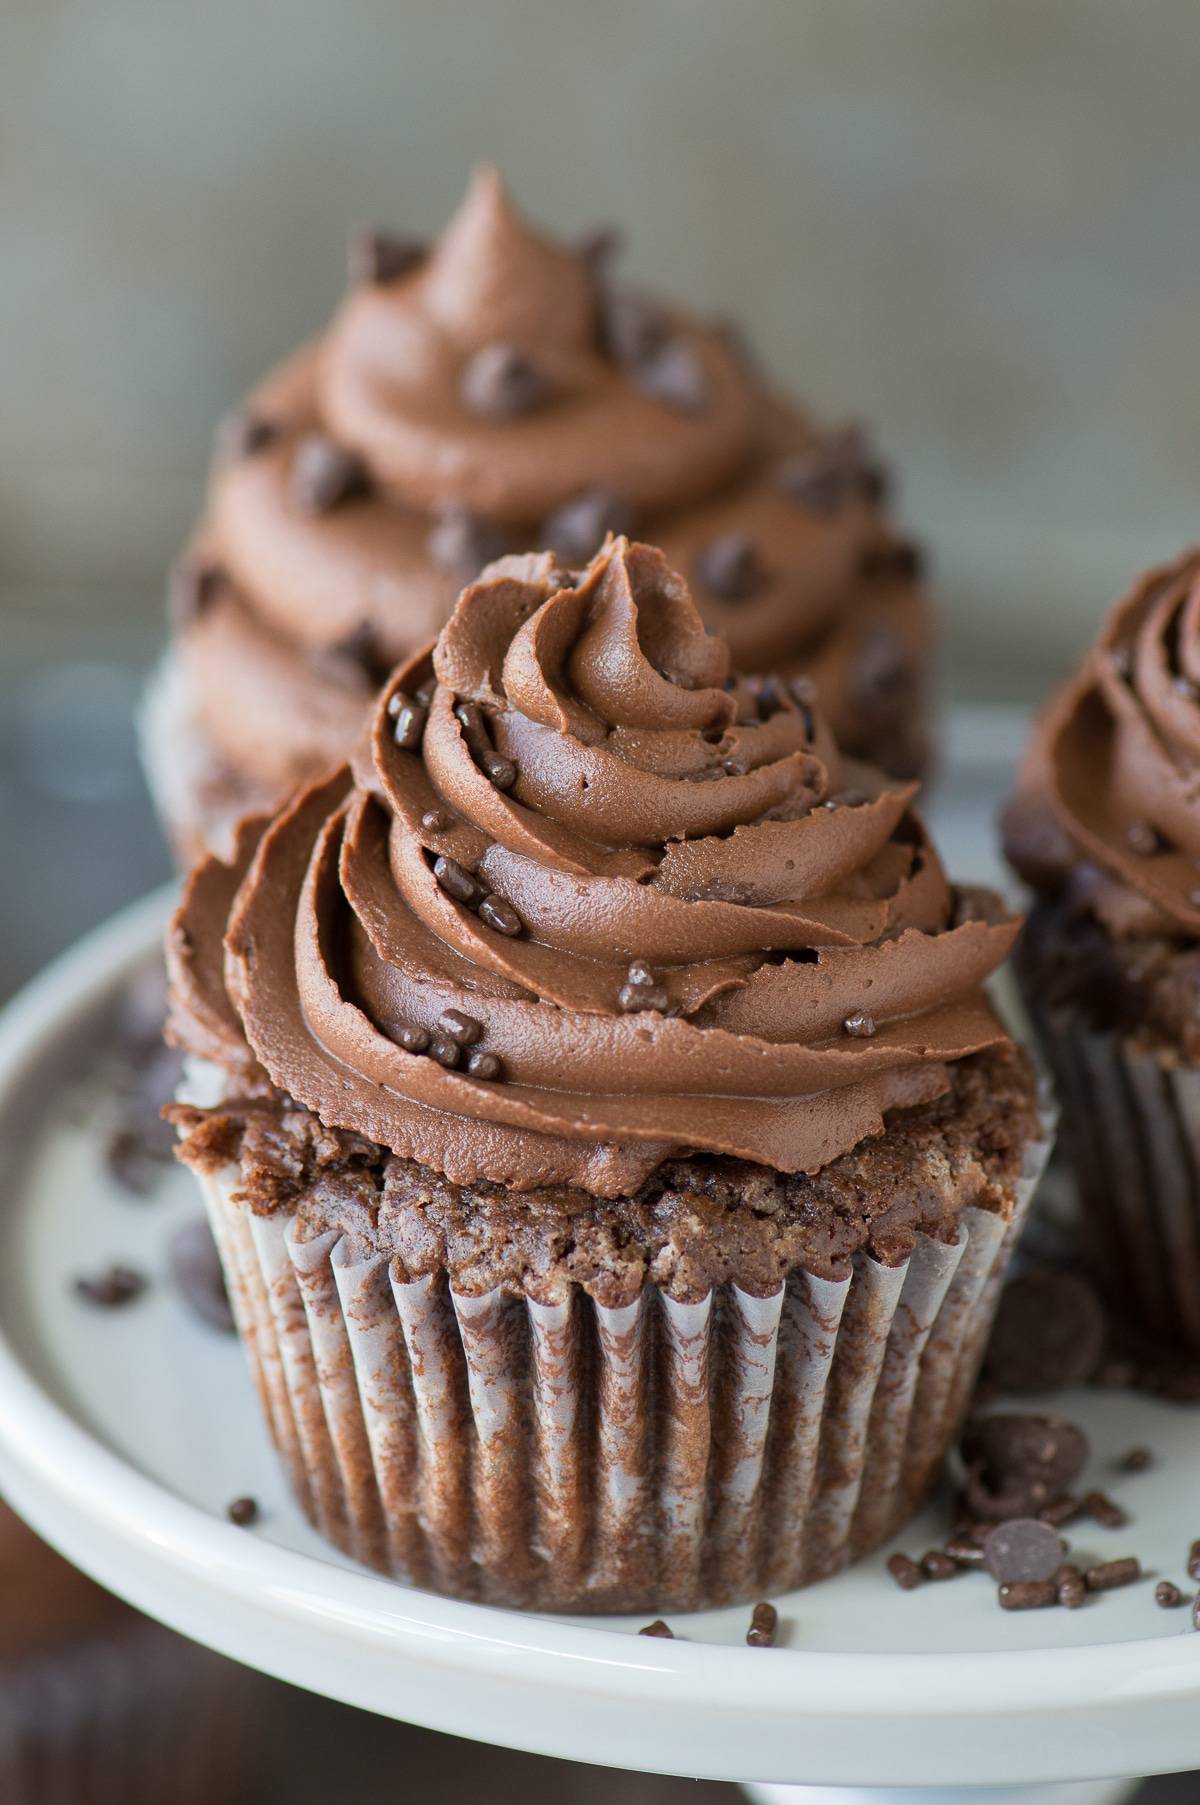 Best Chocolate Buttercream Frosting For Cupcakes - Photos All ...